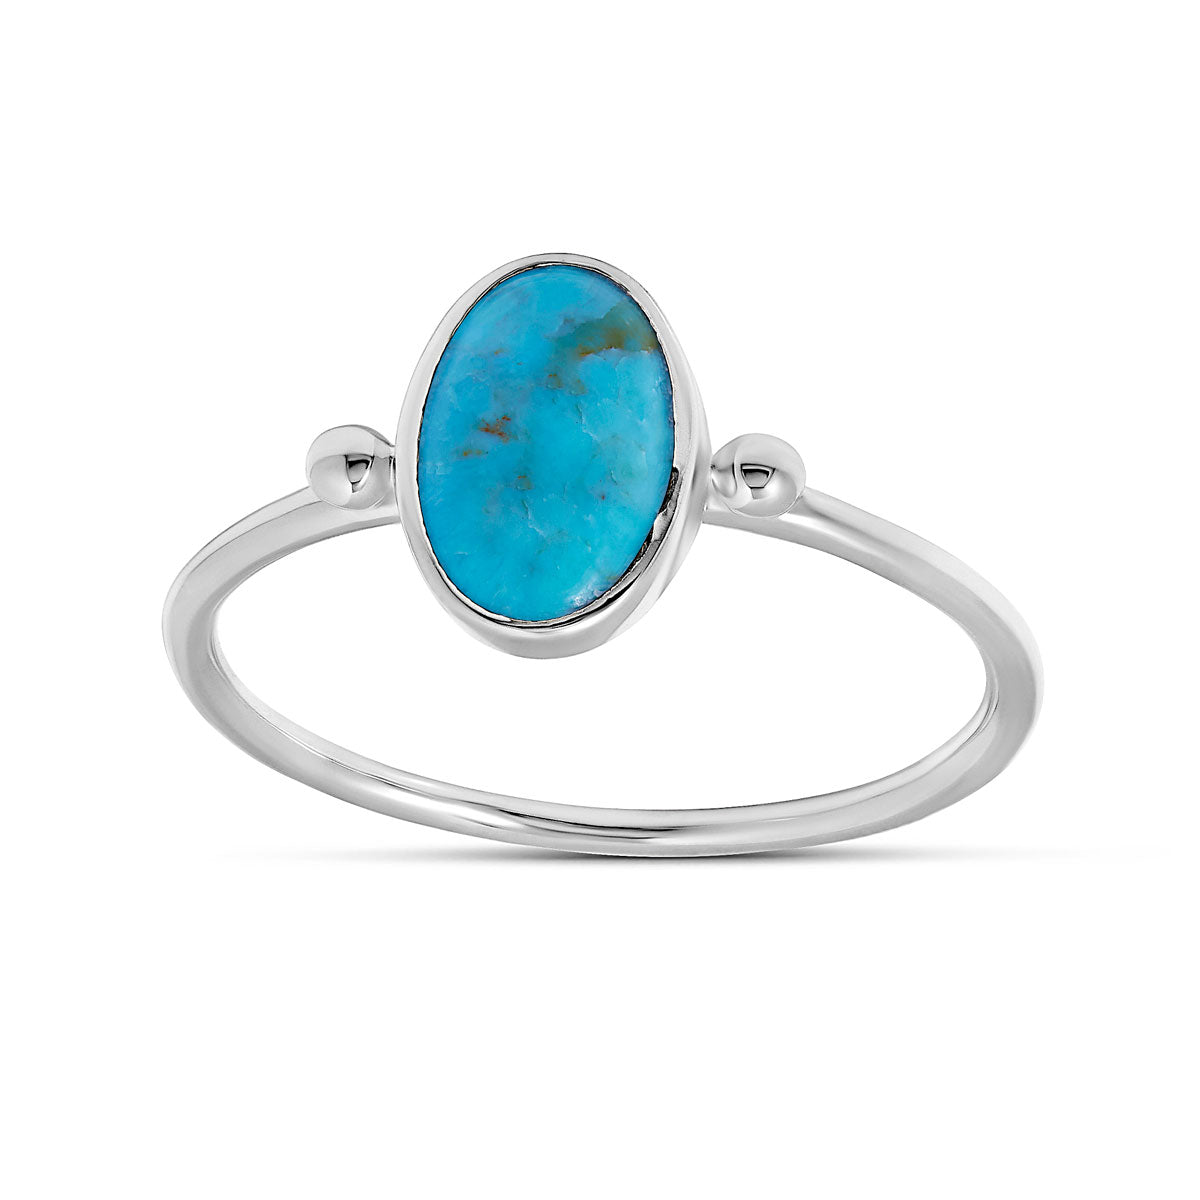 The Lovers Turquoise Ring